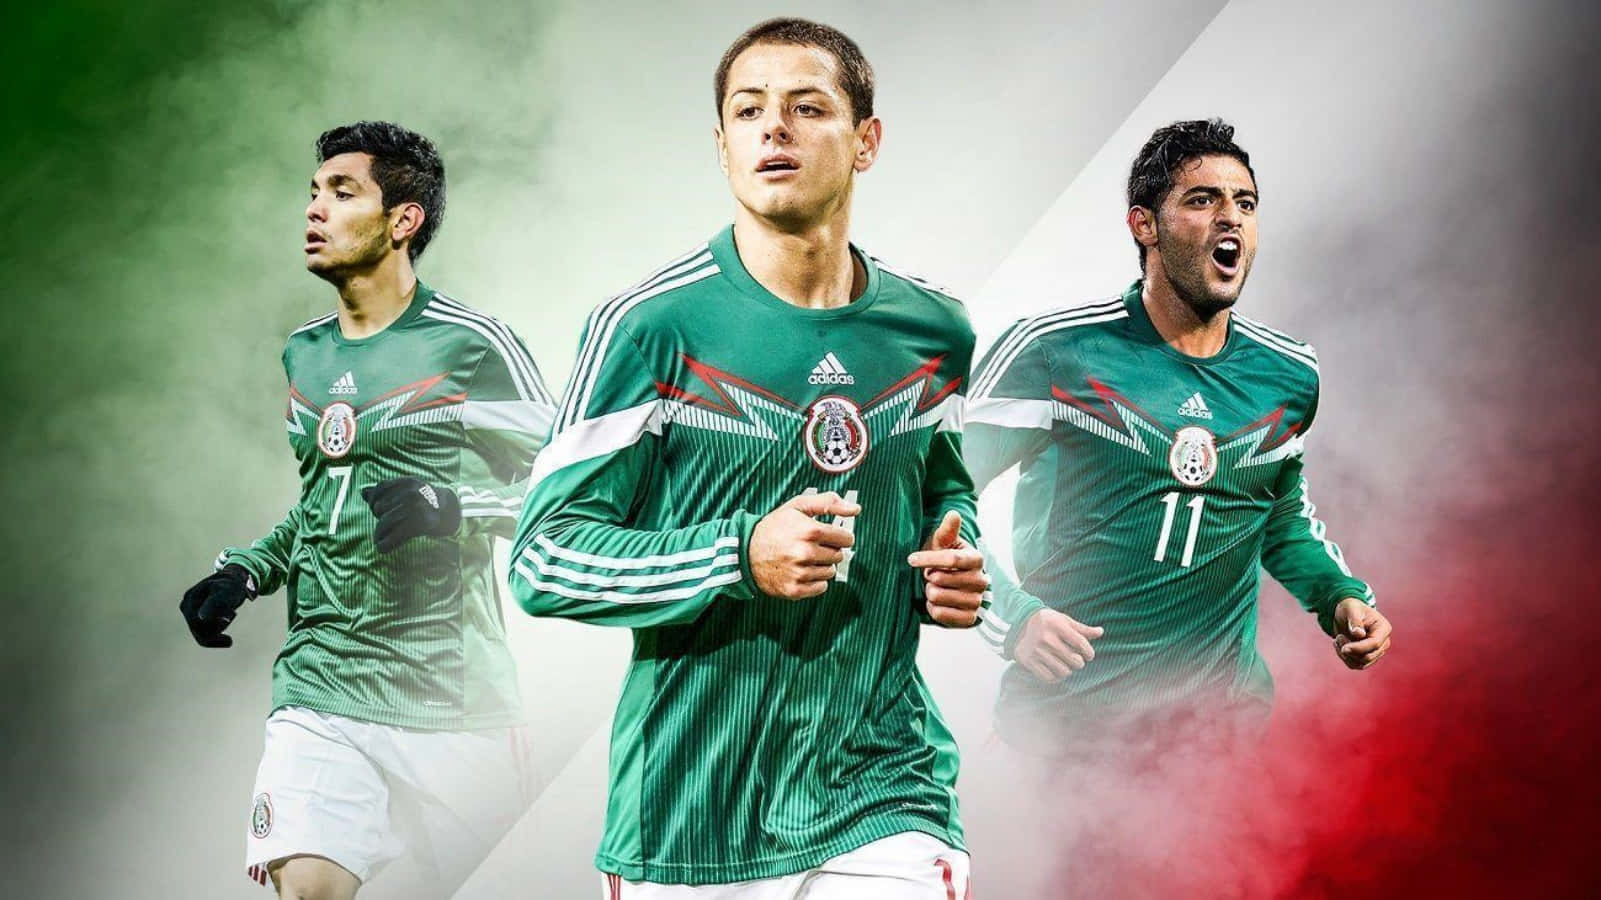 Mexico  Football World Cup iPhone Wallpaper  Splash this   Flickr